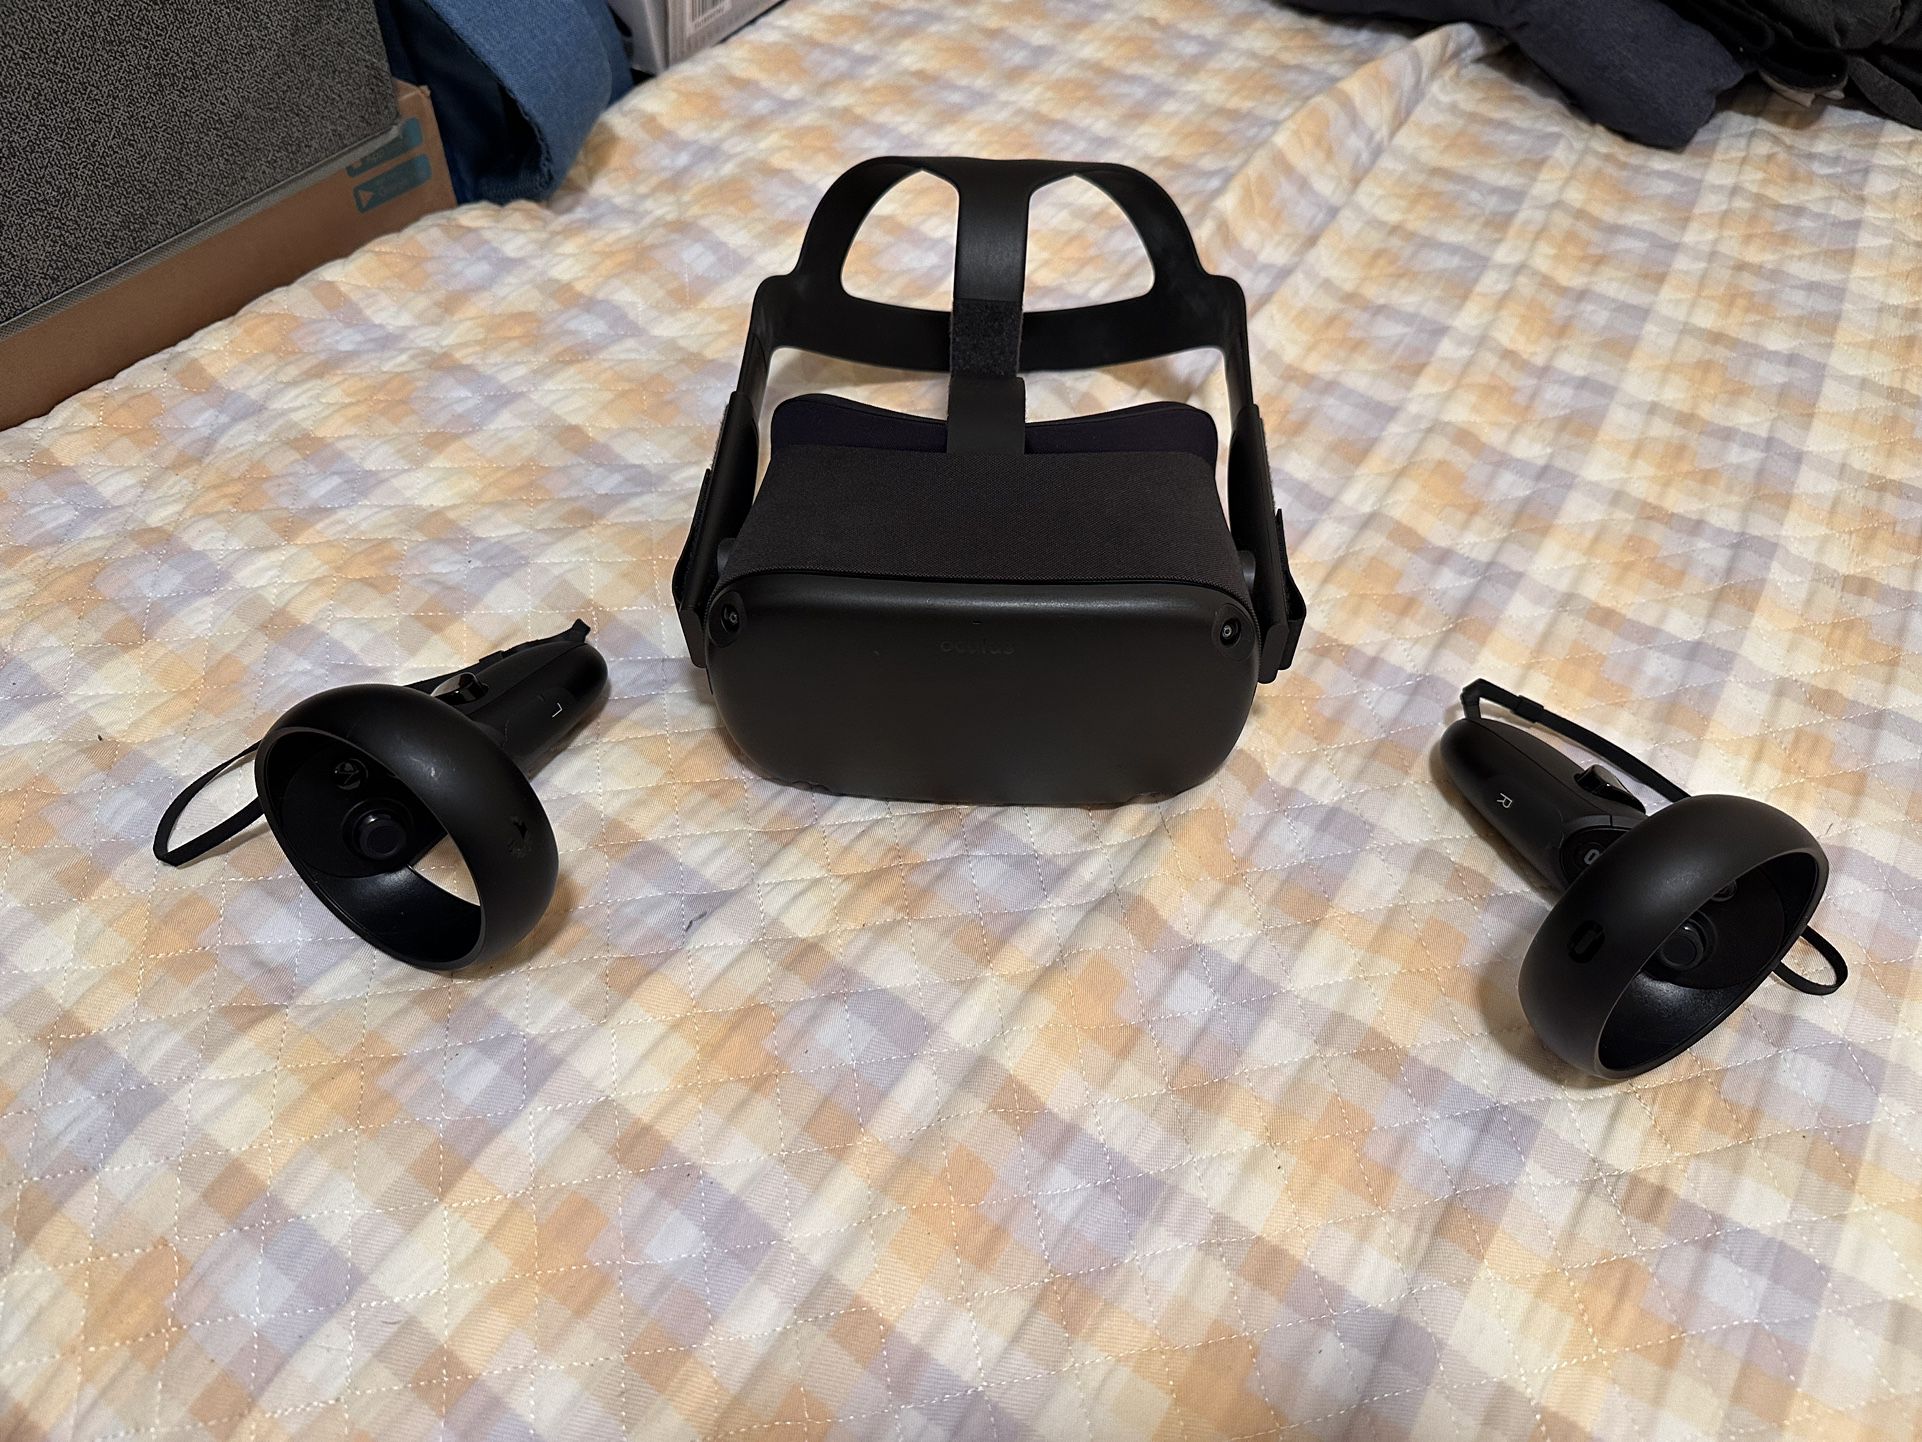 oculus quest all-in-one vr gaming headset(64gb)